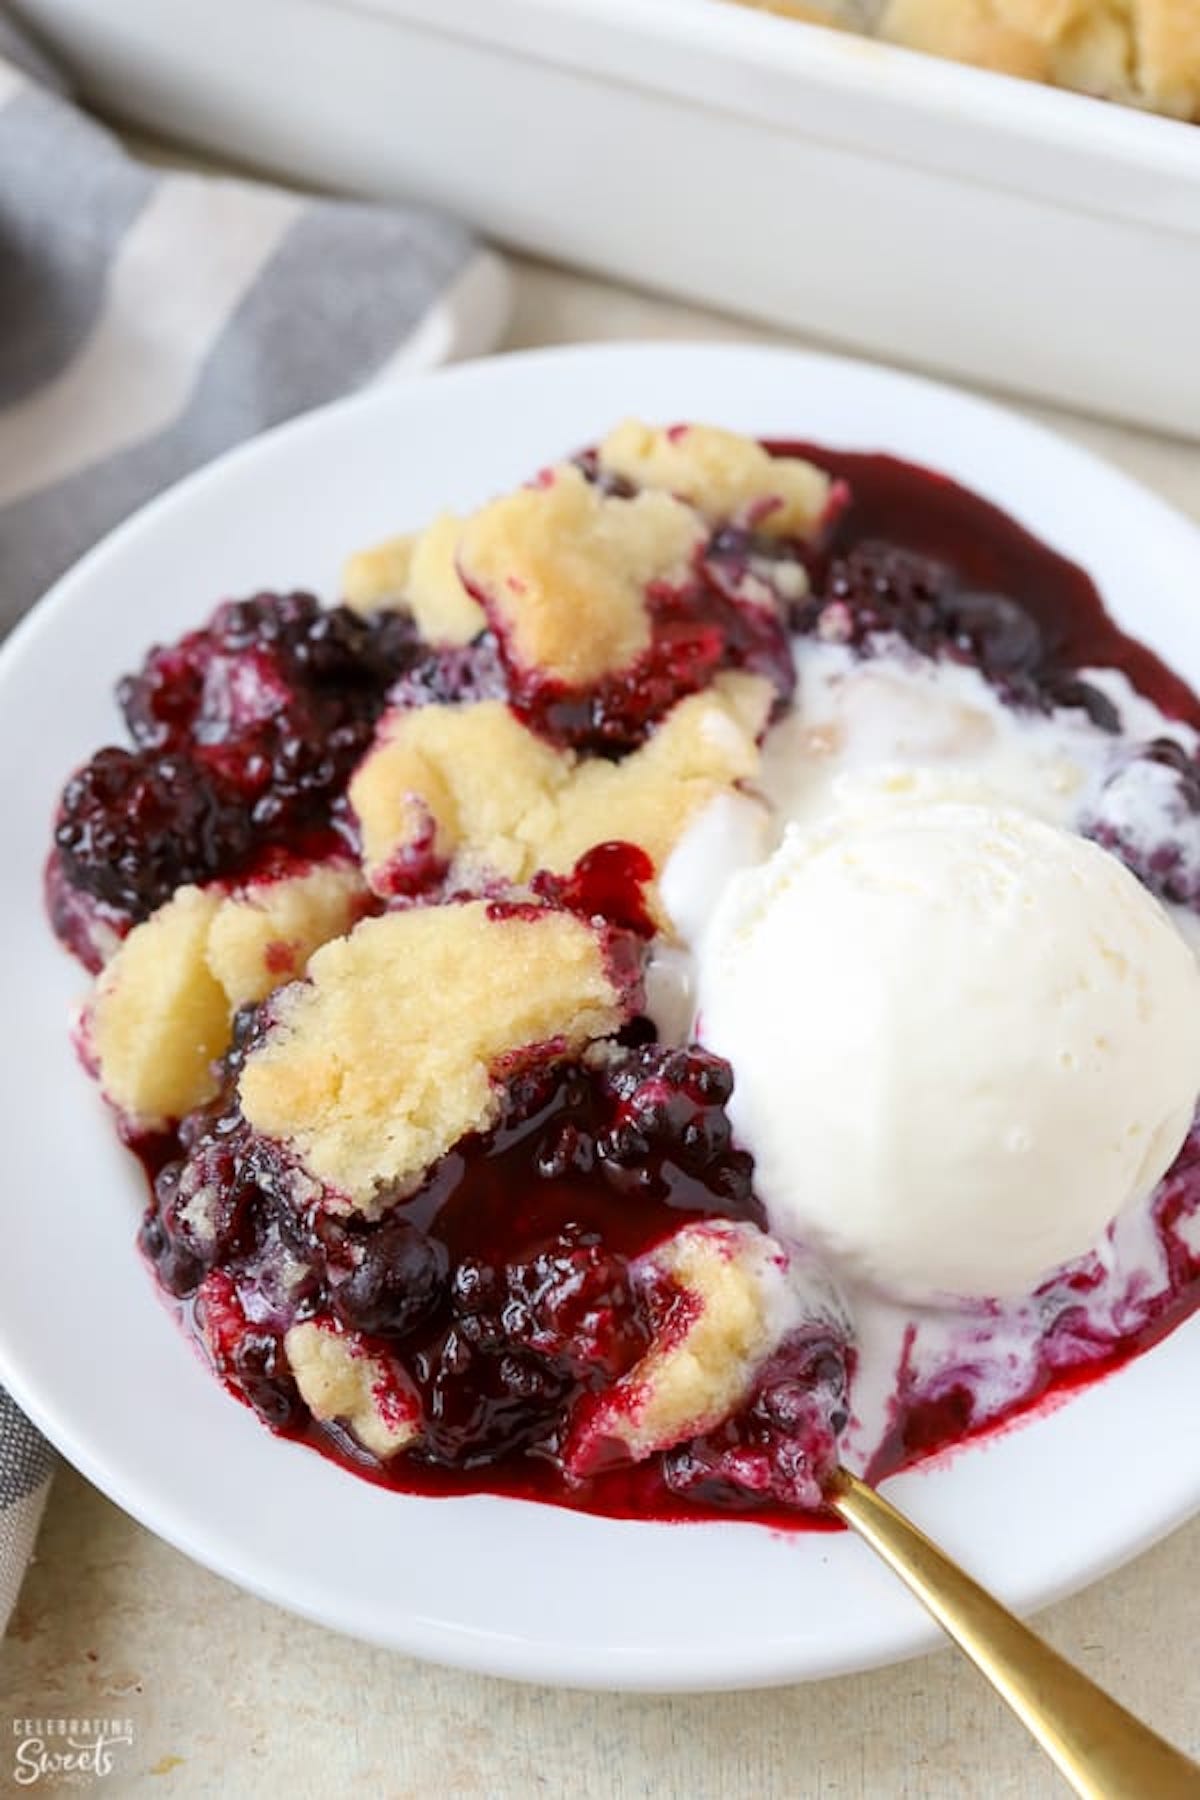 A bowl filled blackberry cobbler and a scoop of vanilla ice cream that has already started to melt.